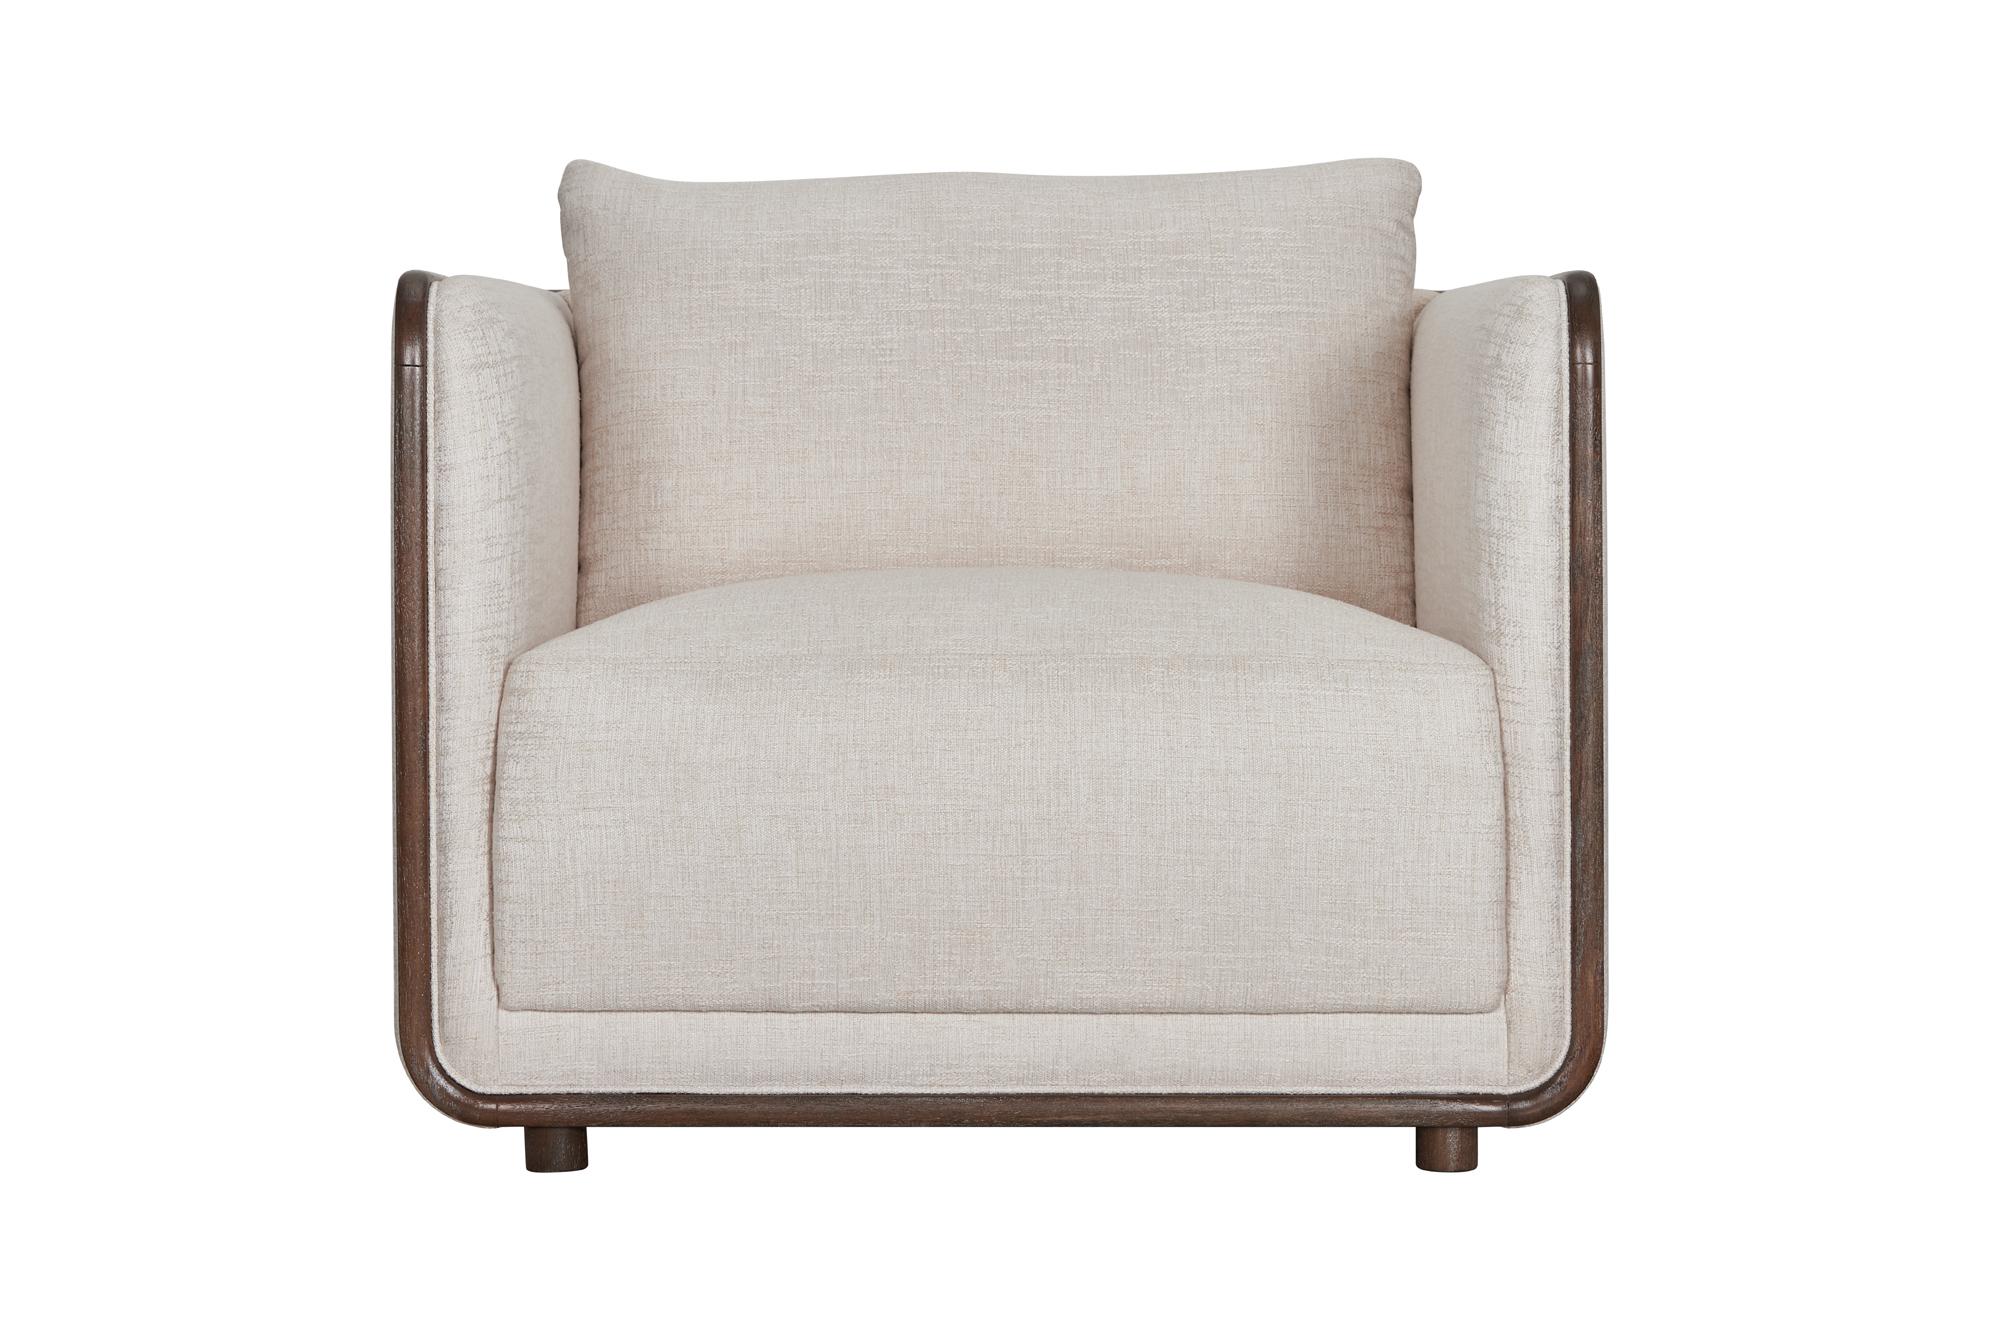 Contemporary, Modern, Casual Oversized Chair Sagrada 764503-5303 764503-5303 in Ivory Fabric